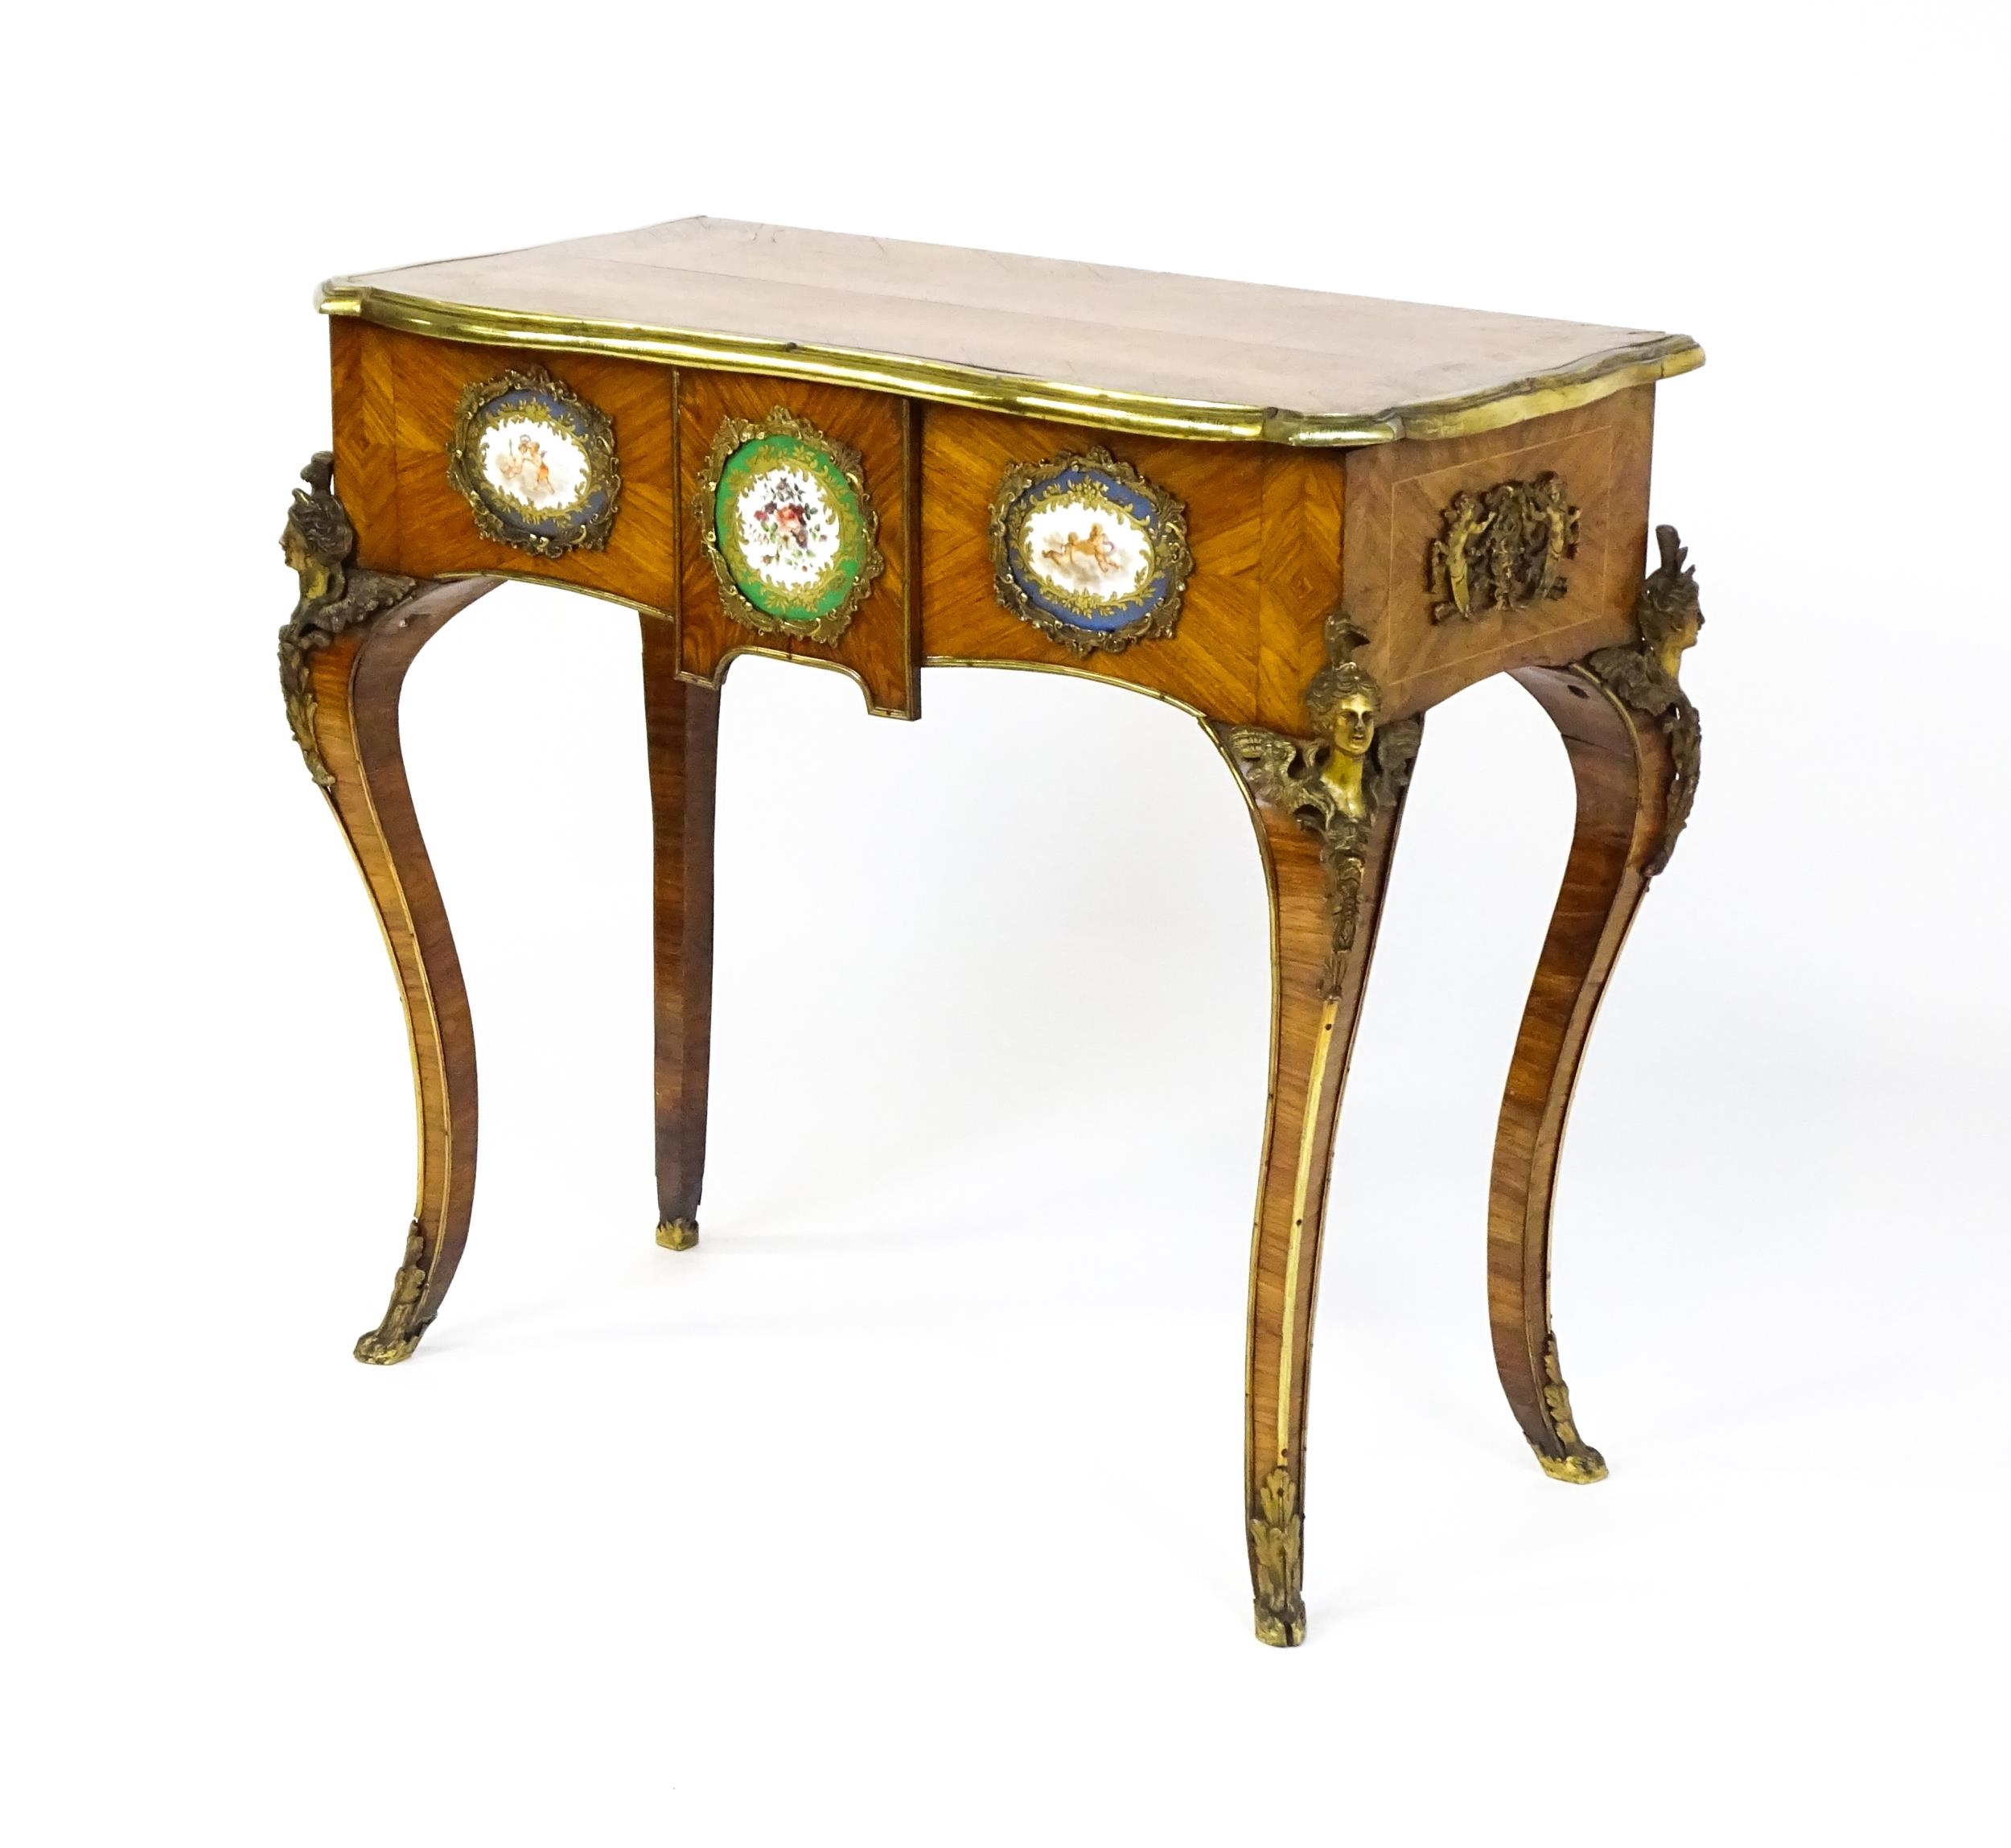 A mid 19thC kingwood side table with a brass moulding to the top edge and three Sevres style plaques - Image 14 of 14